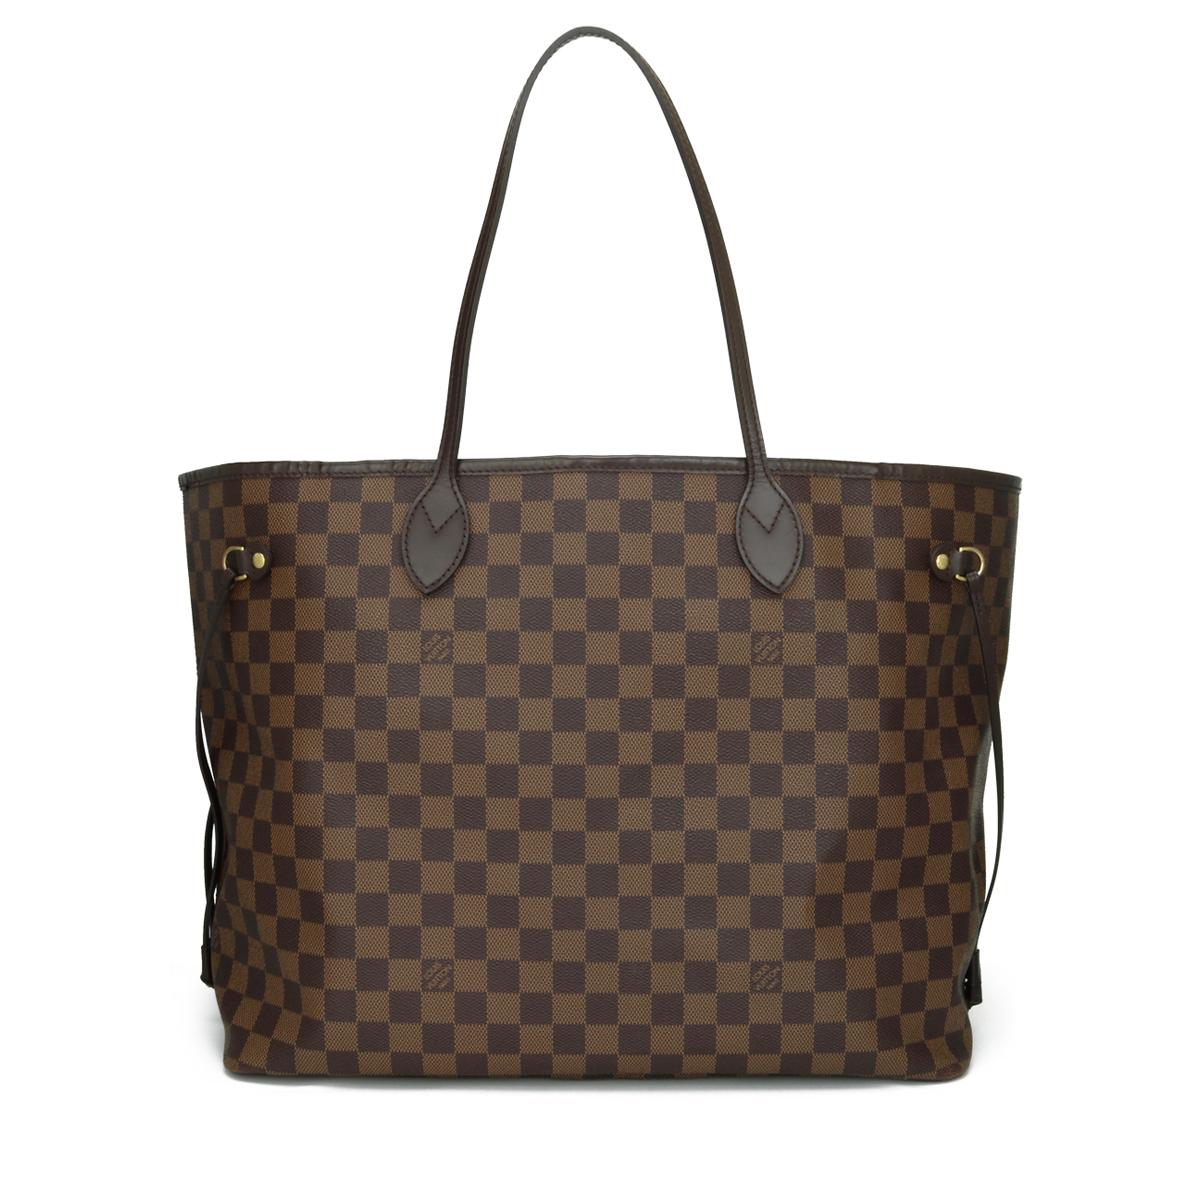 Louis Vuitton Neverfull GM in Damier Ebène with Cherry Red Interior 2015.

This bag is in very good condition. 

- Exterior Condition: Very good condition. Light storage creases to the canvas. Surface rubbing to four base corners. Light general